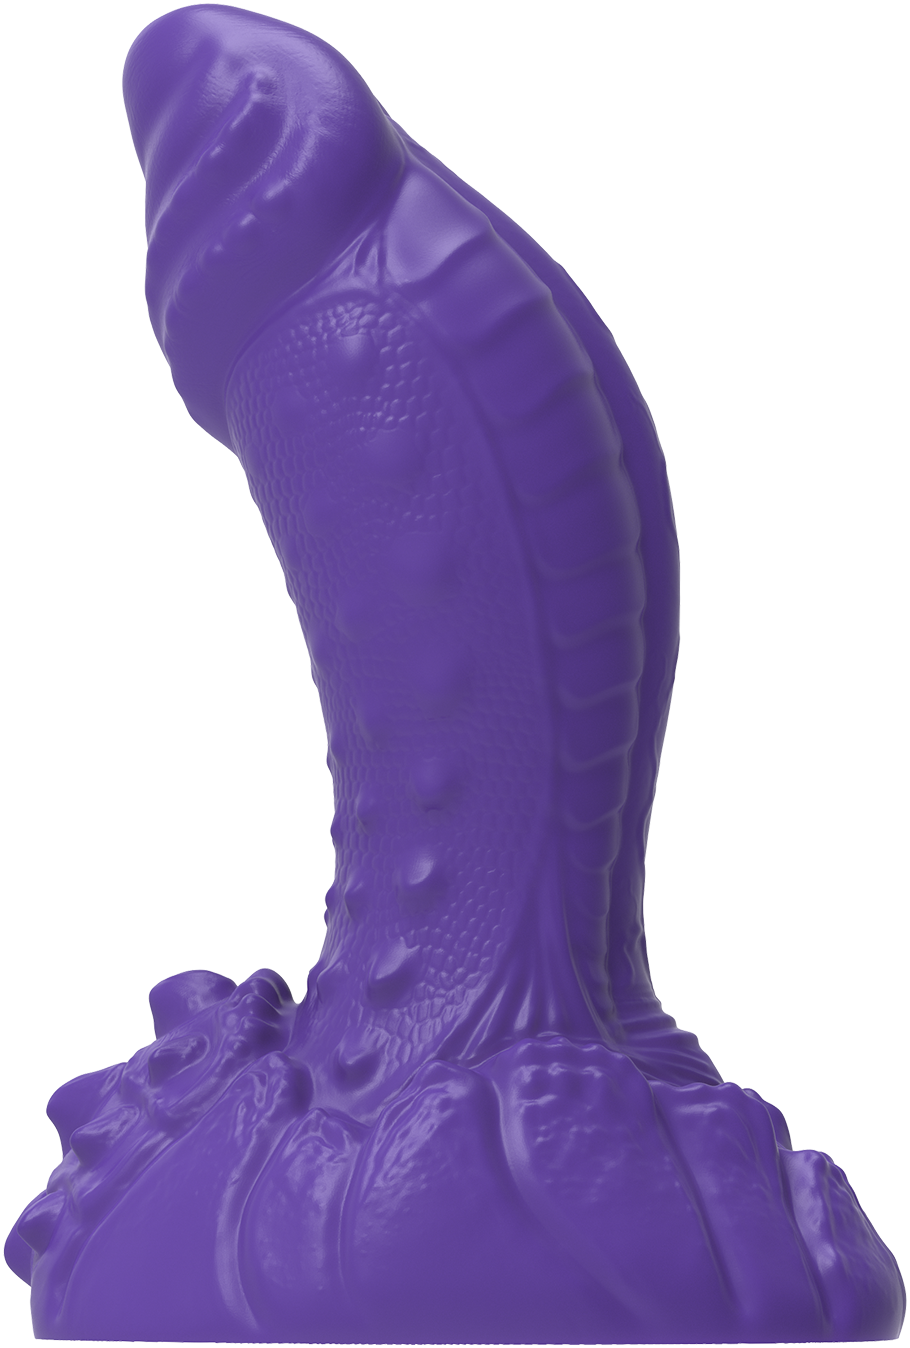 anju ramesh recommends bad dragon stan review pic